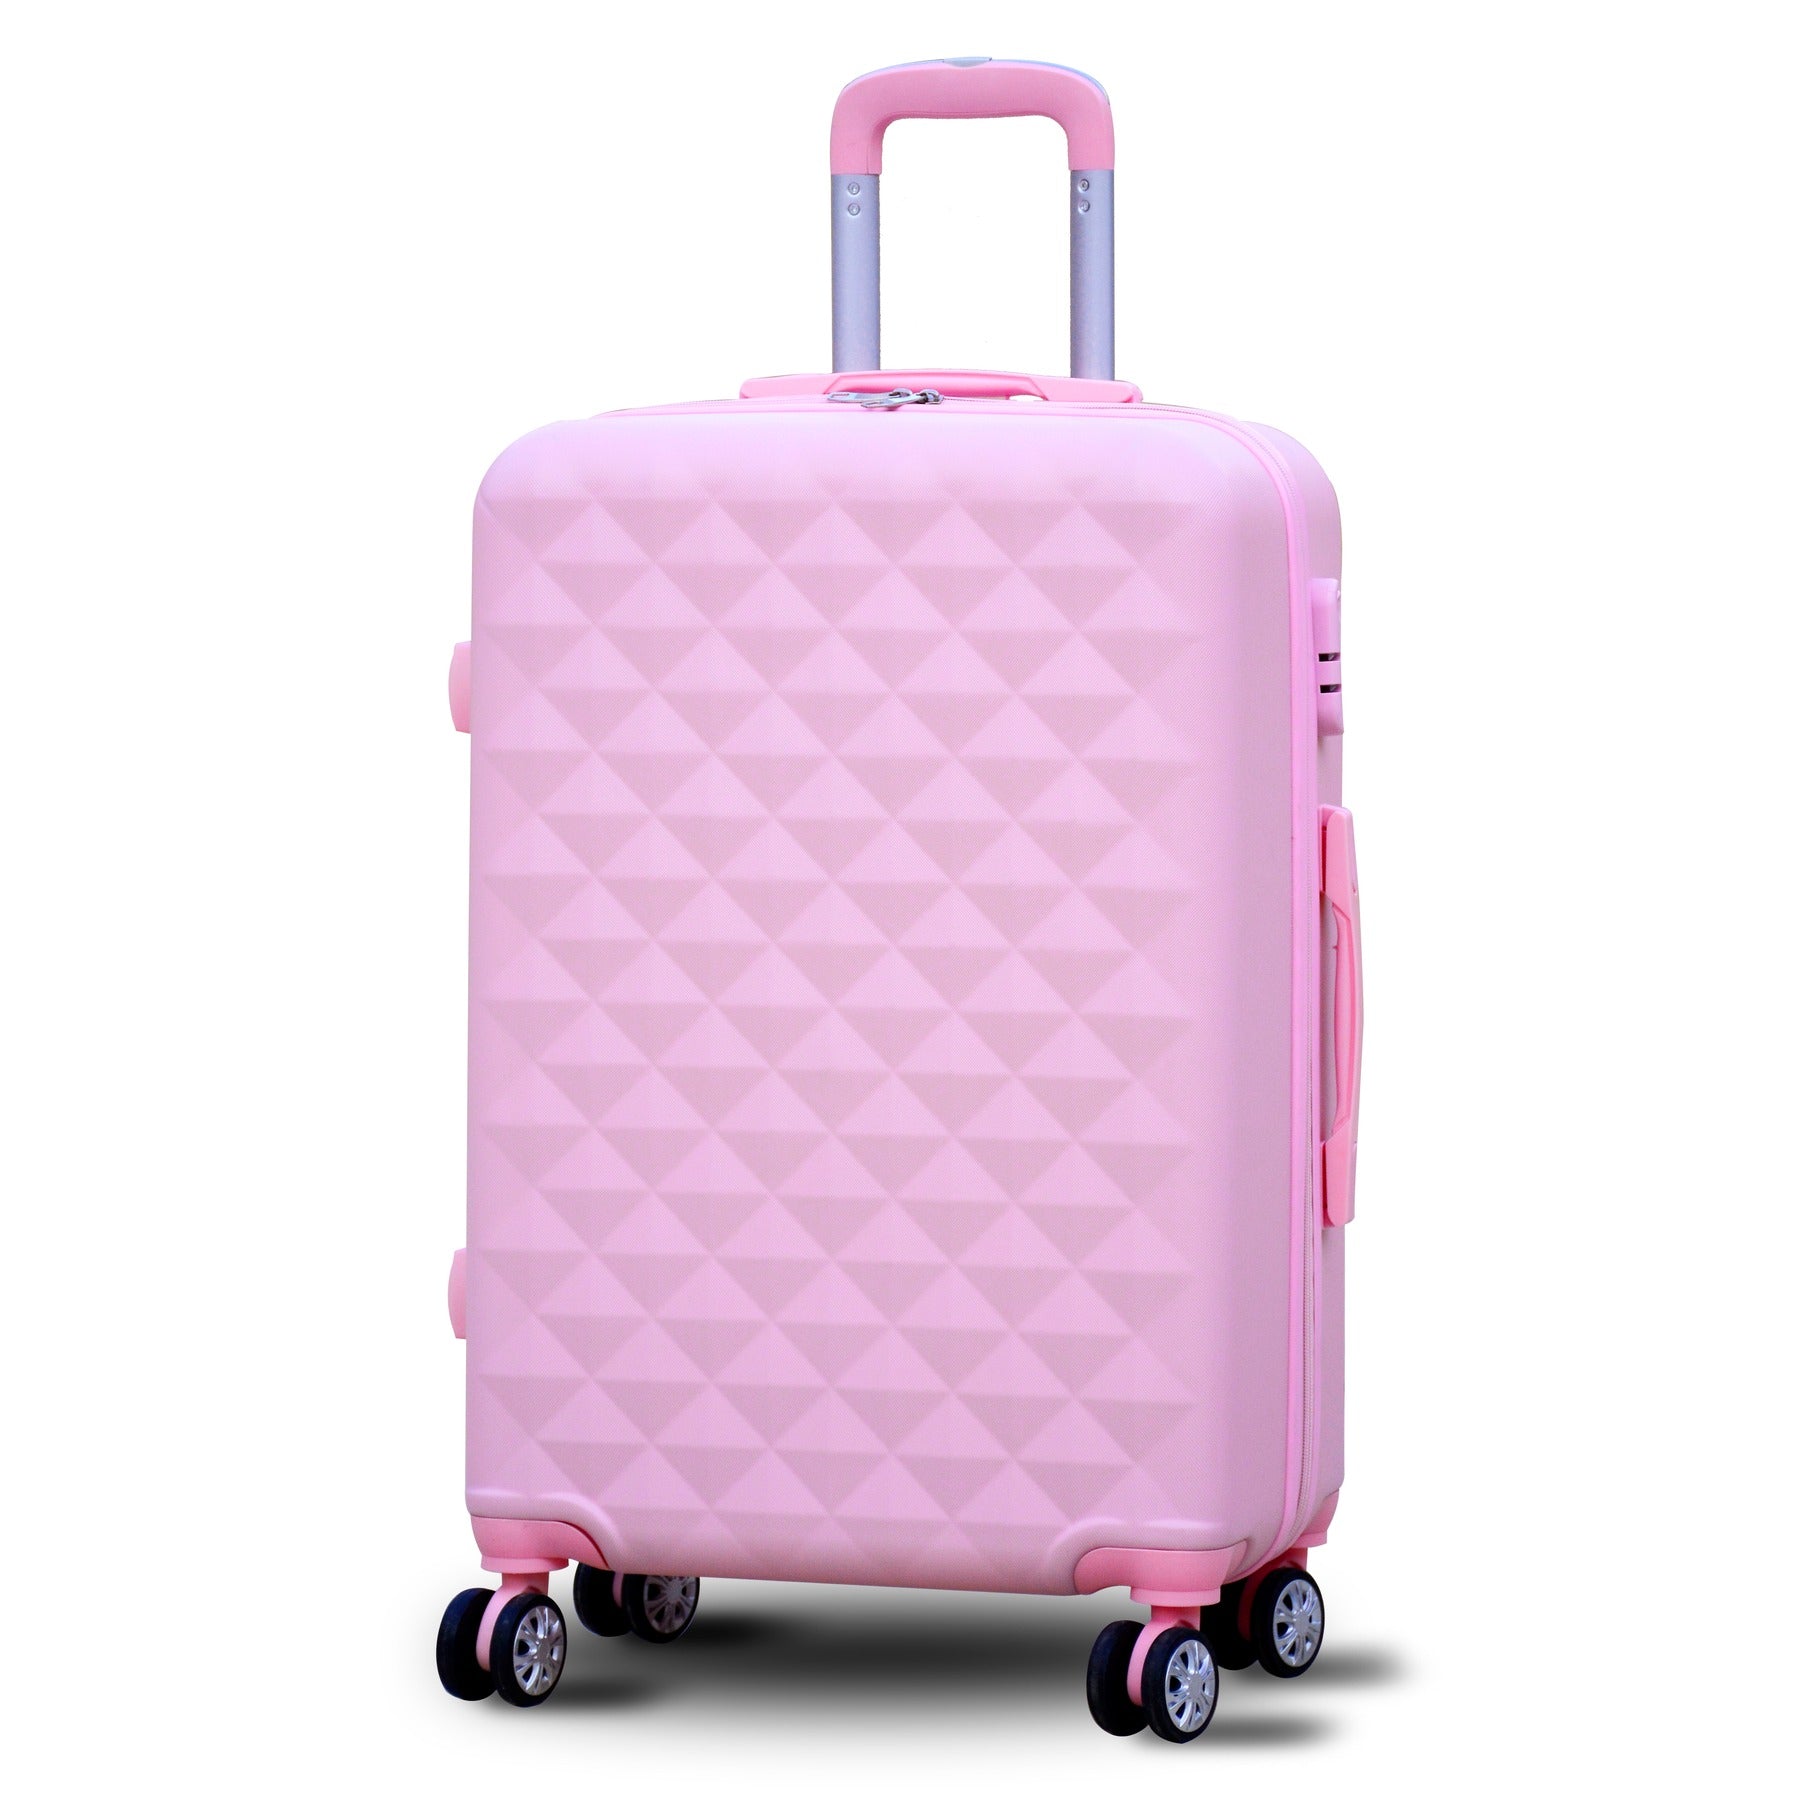 28" Diamond Cut ABS Lightweight Luggage Bag With Spinner Wheel Zaappy